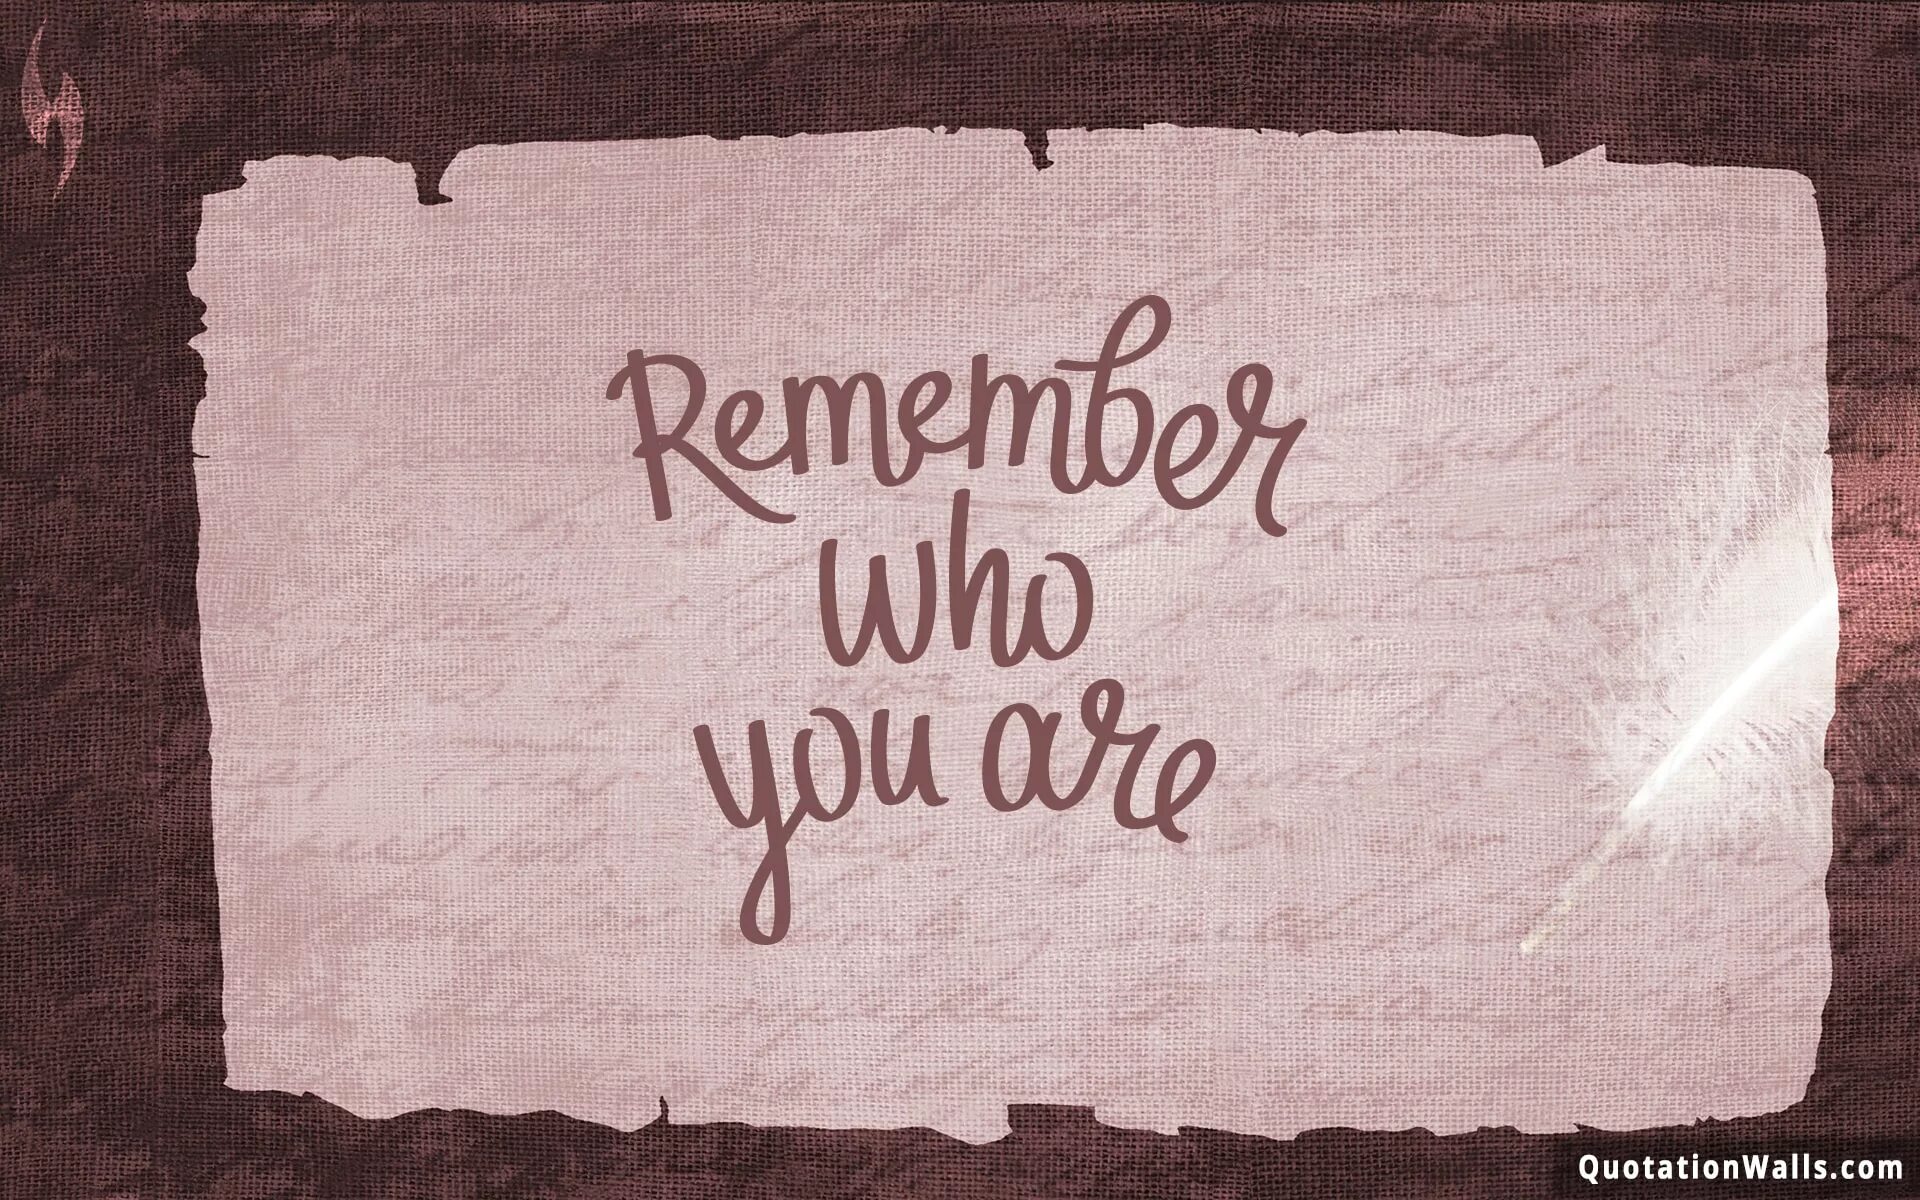 Remember who you are Wallpaper. Remember who you are обои. Ремембер ху ю а. Remember who you started.